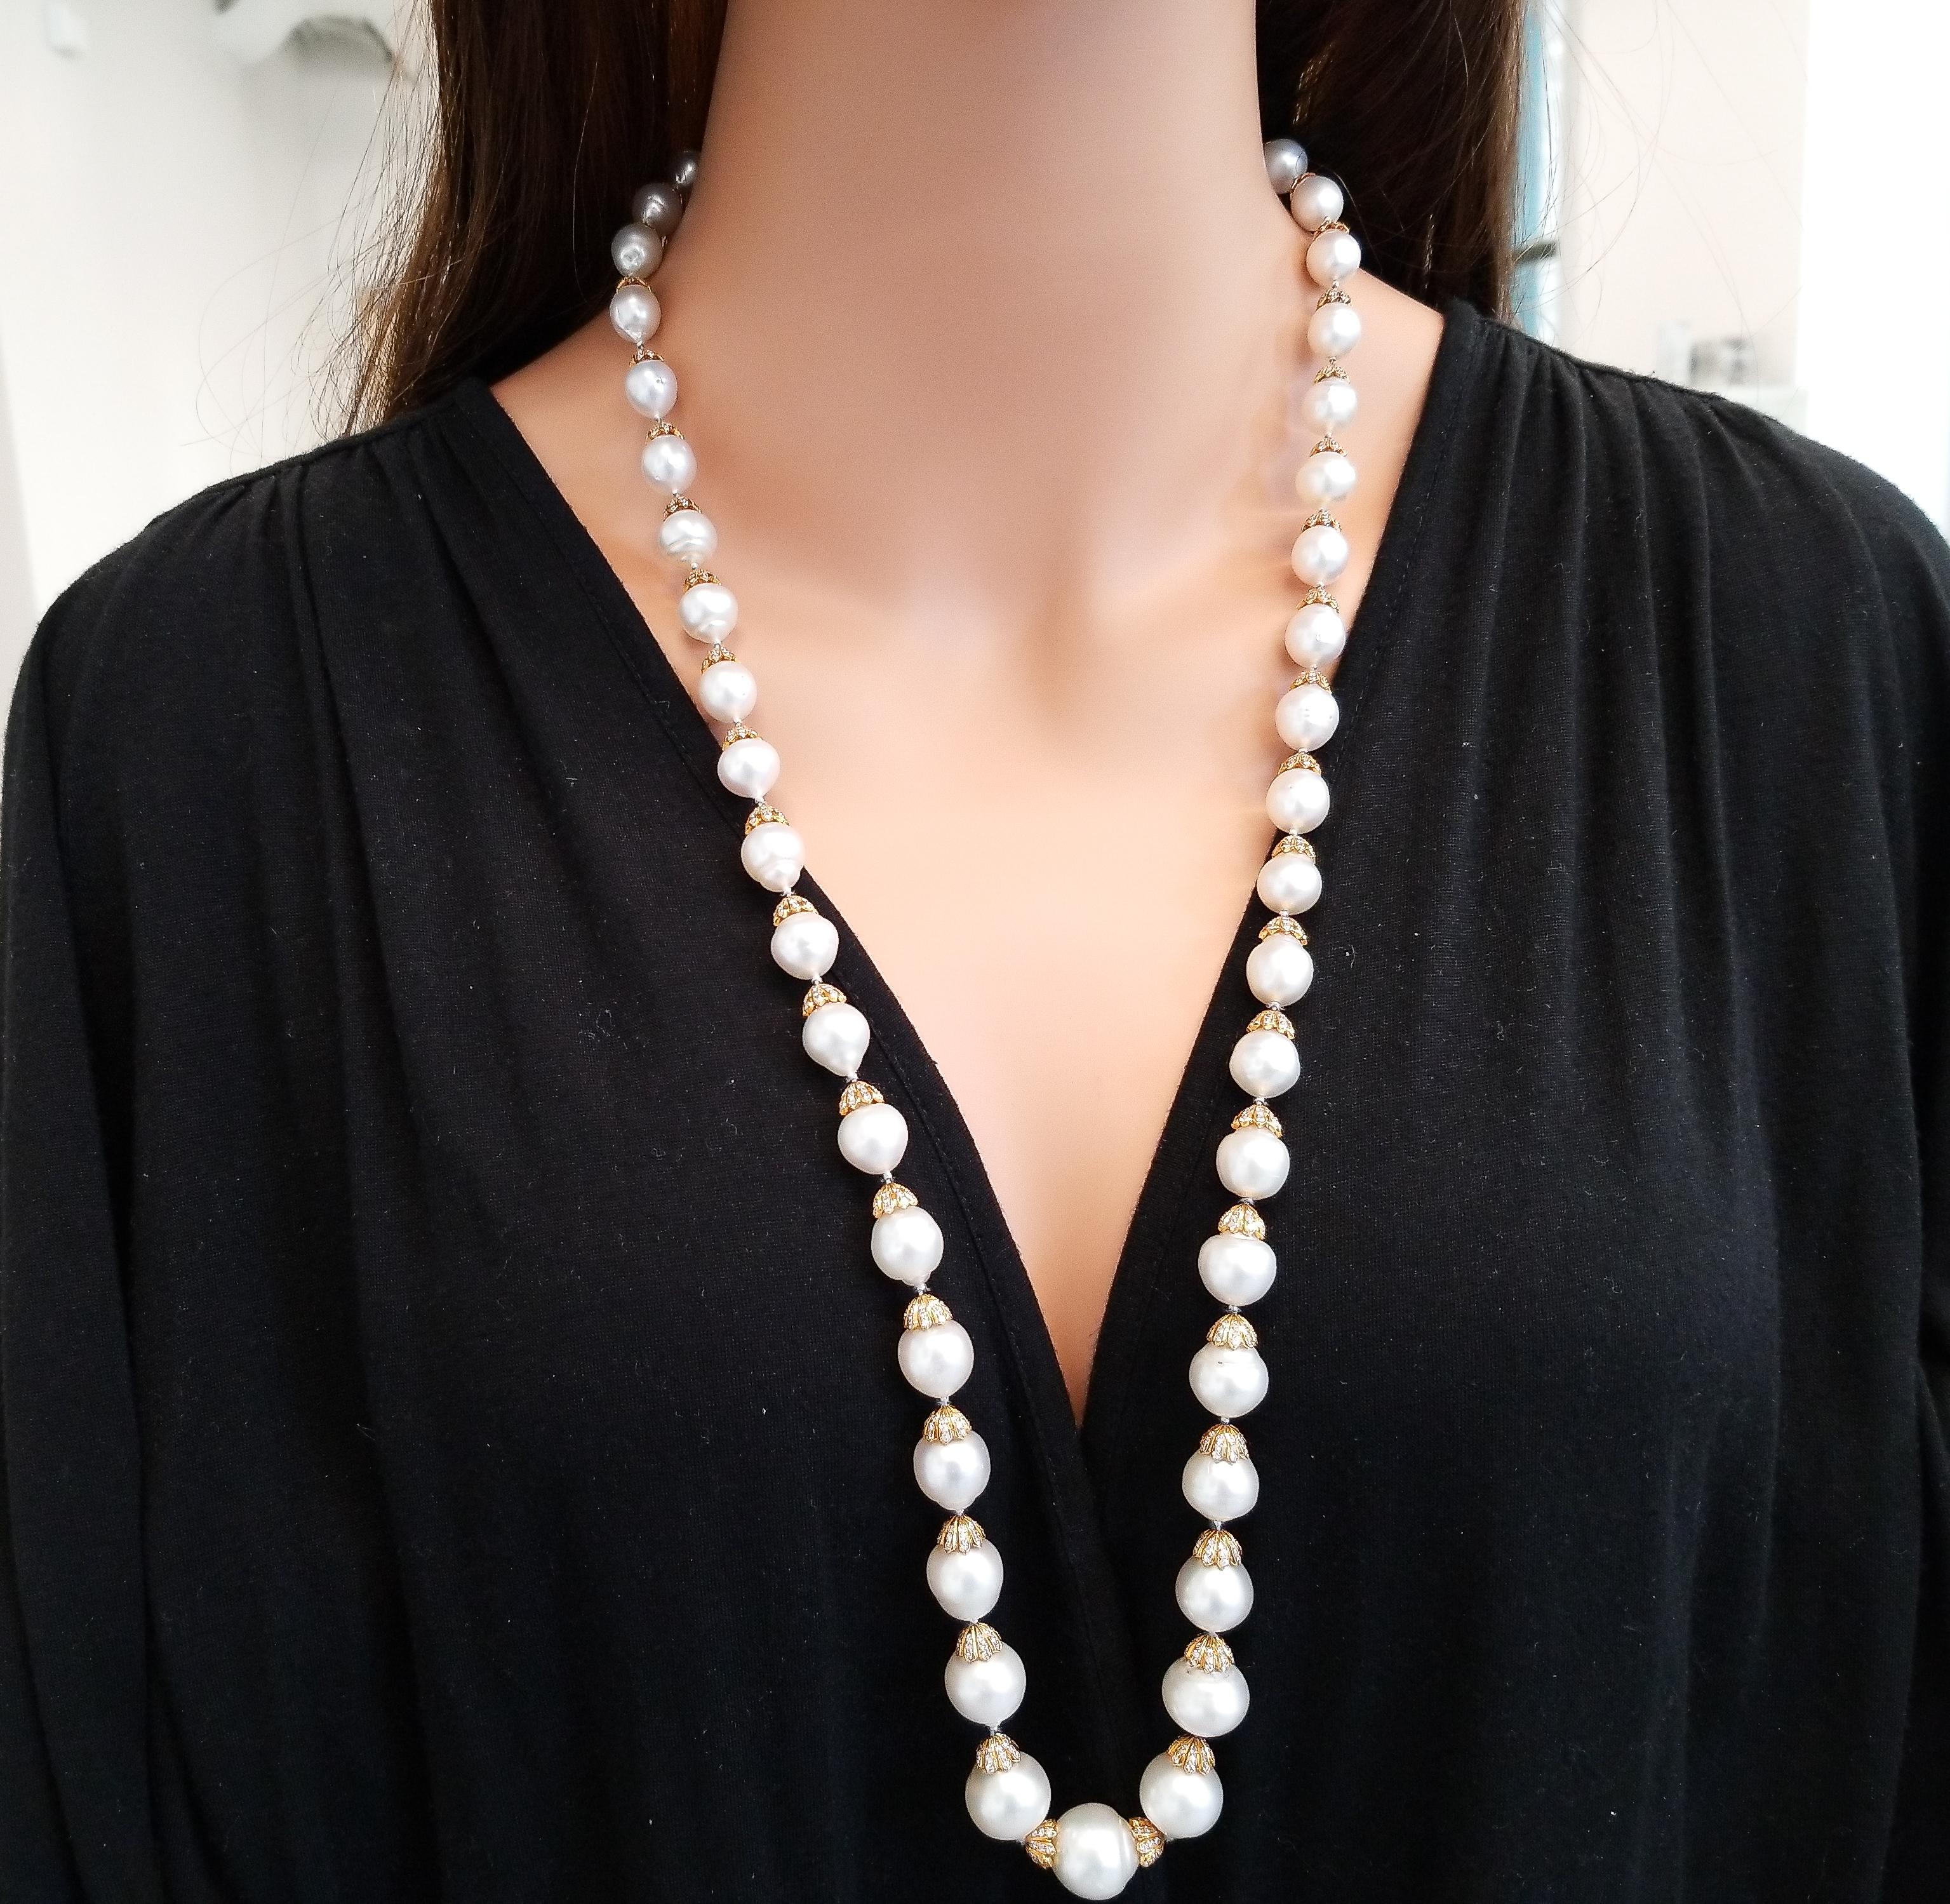 Round Cut Australian South Sea Pearl and Diamond Necklace with 18 Karat White Gold Clasp